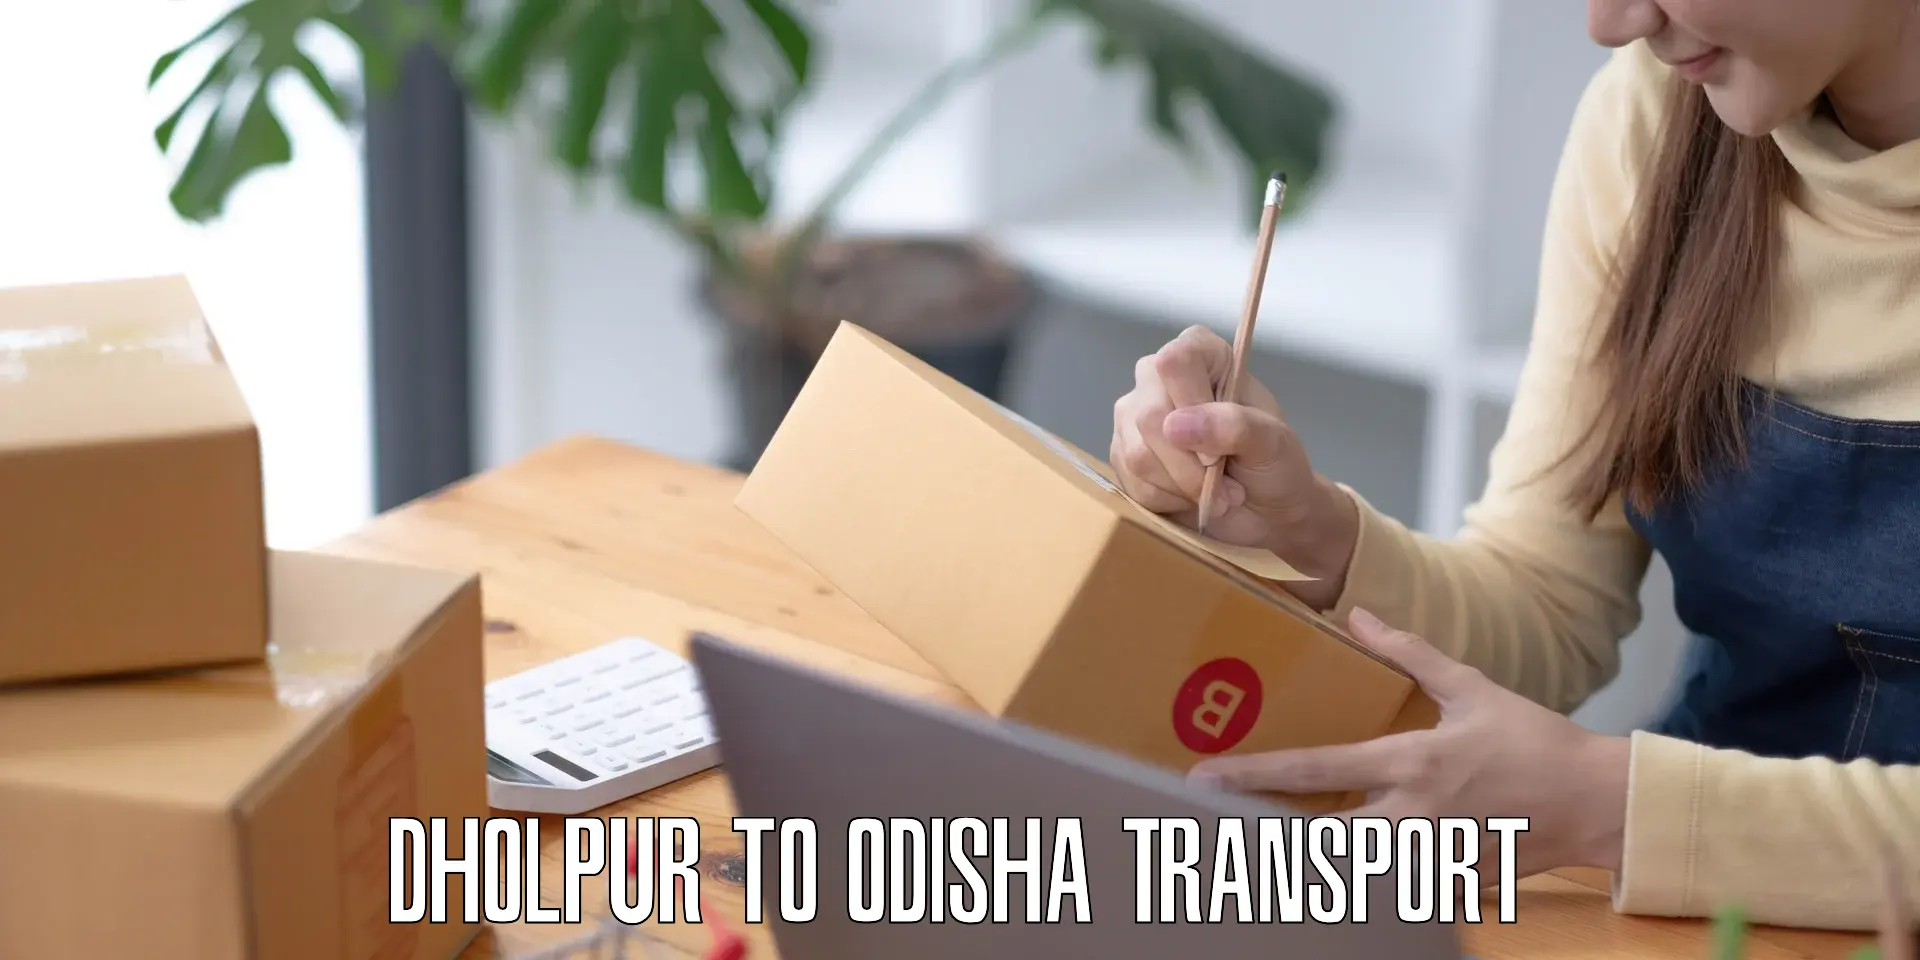 Transport in sharing Dholpur to Odisha